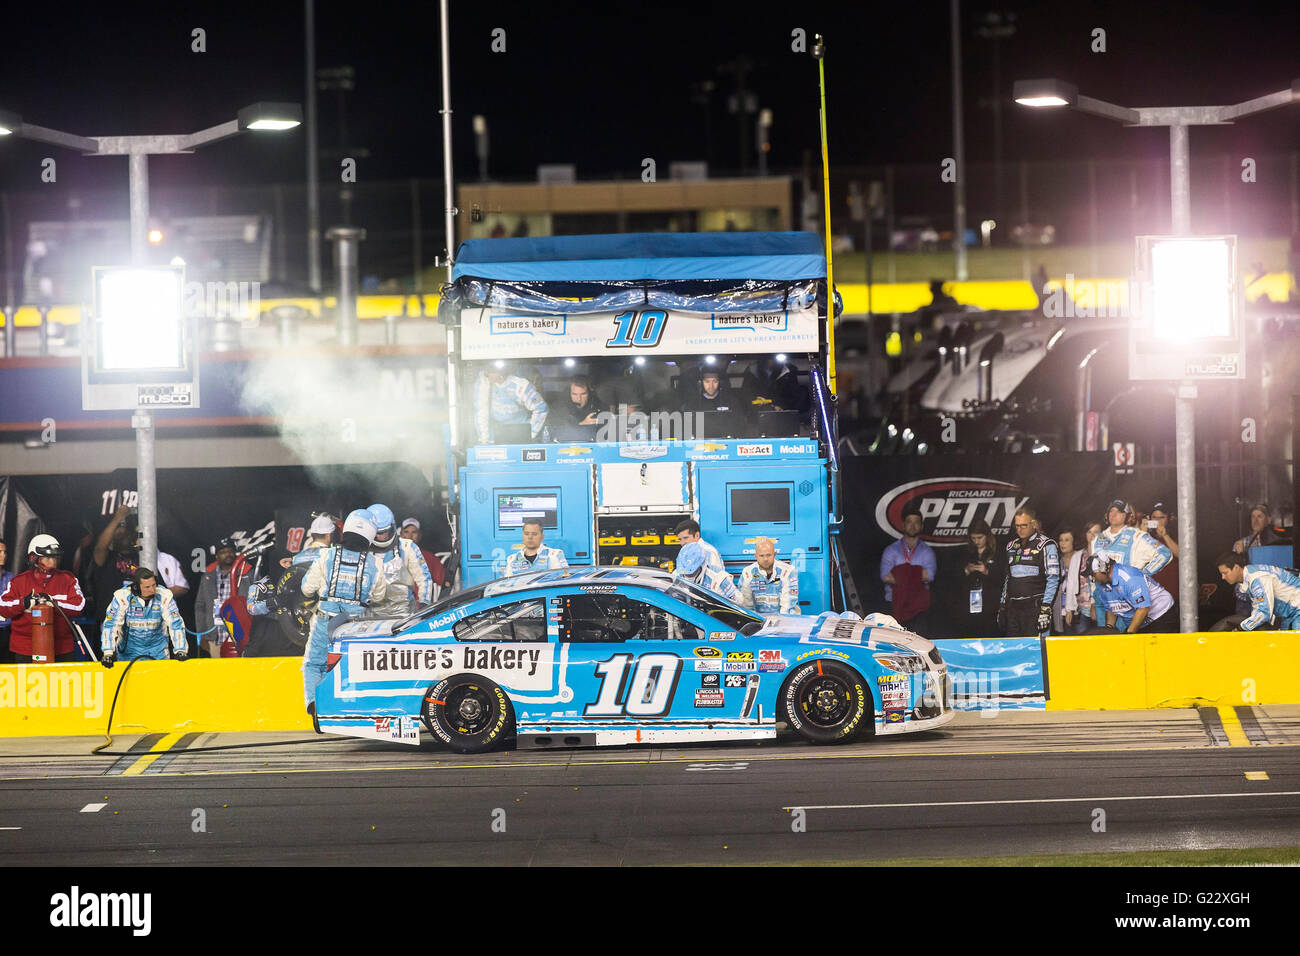 Concord, NC, USA. 21st May, 2016. Concord, NC - May 21, 2016: Danica Patrick (10) brings his race car in for service during The Sprint All-Star Race at the Charlotte Motor Speedway in Concord, NC. © csm/Alamy Live News Stock Photo